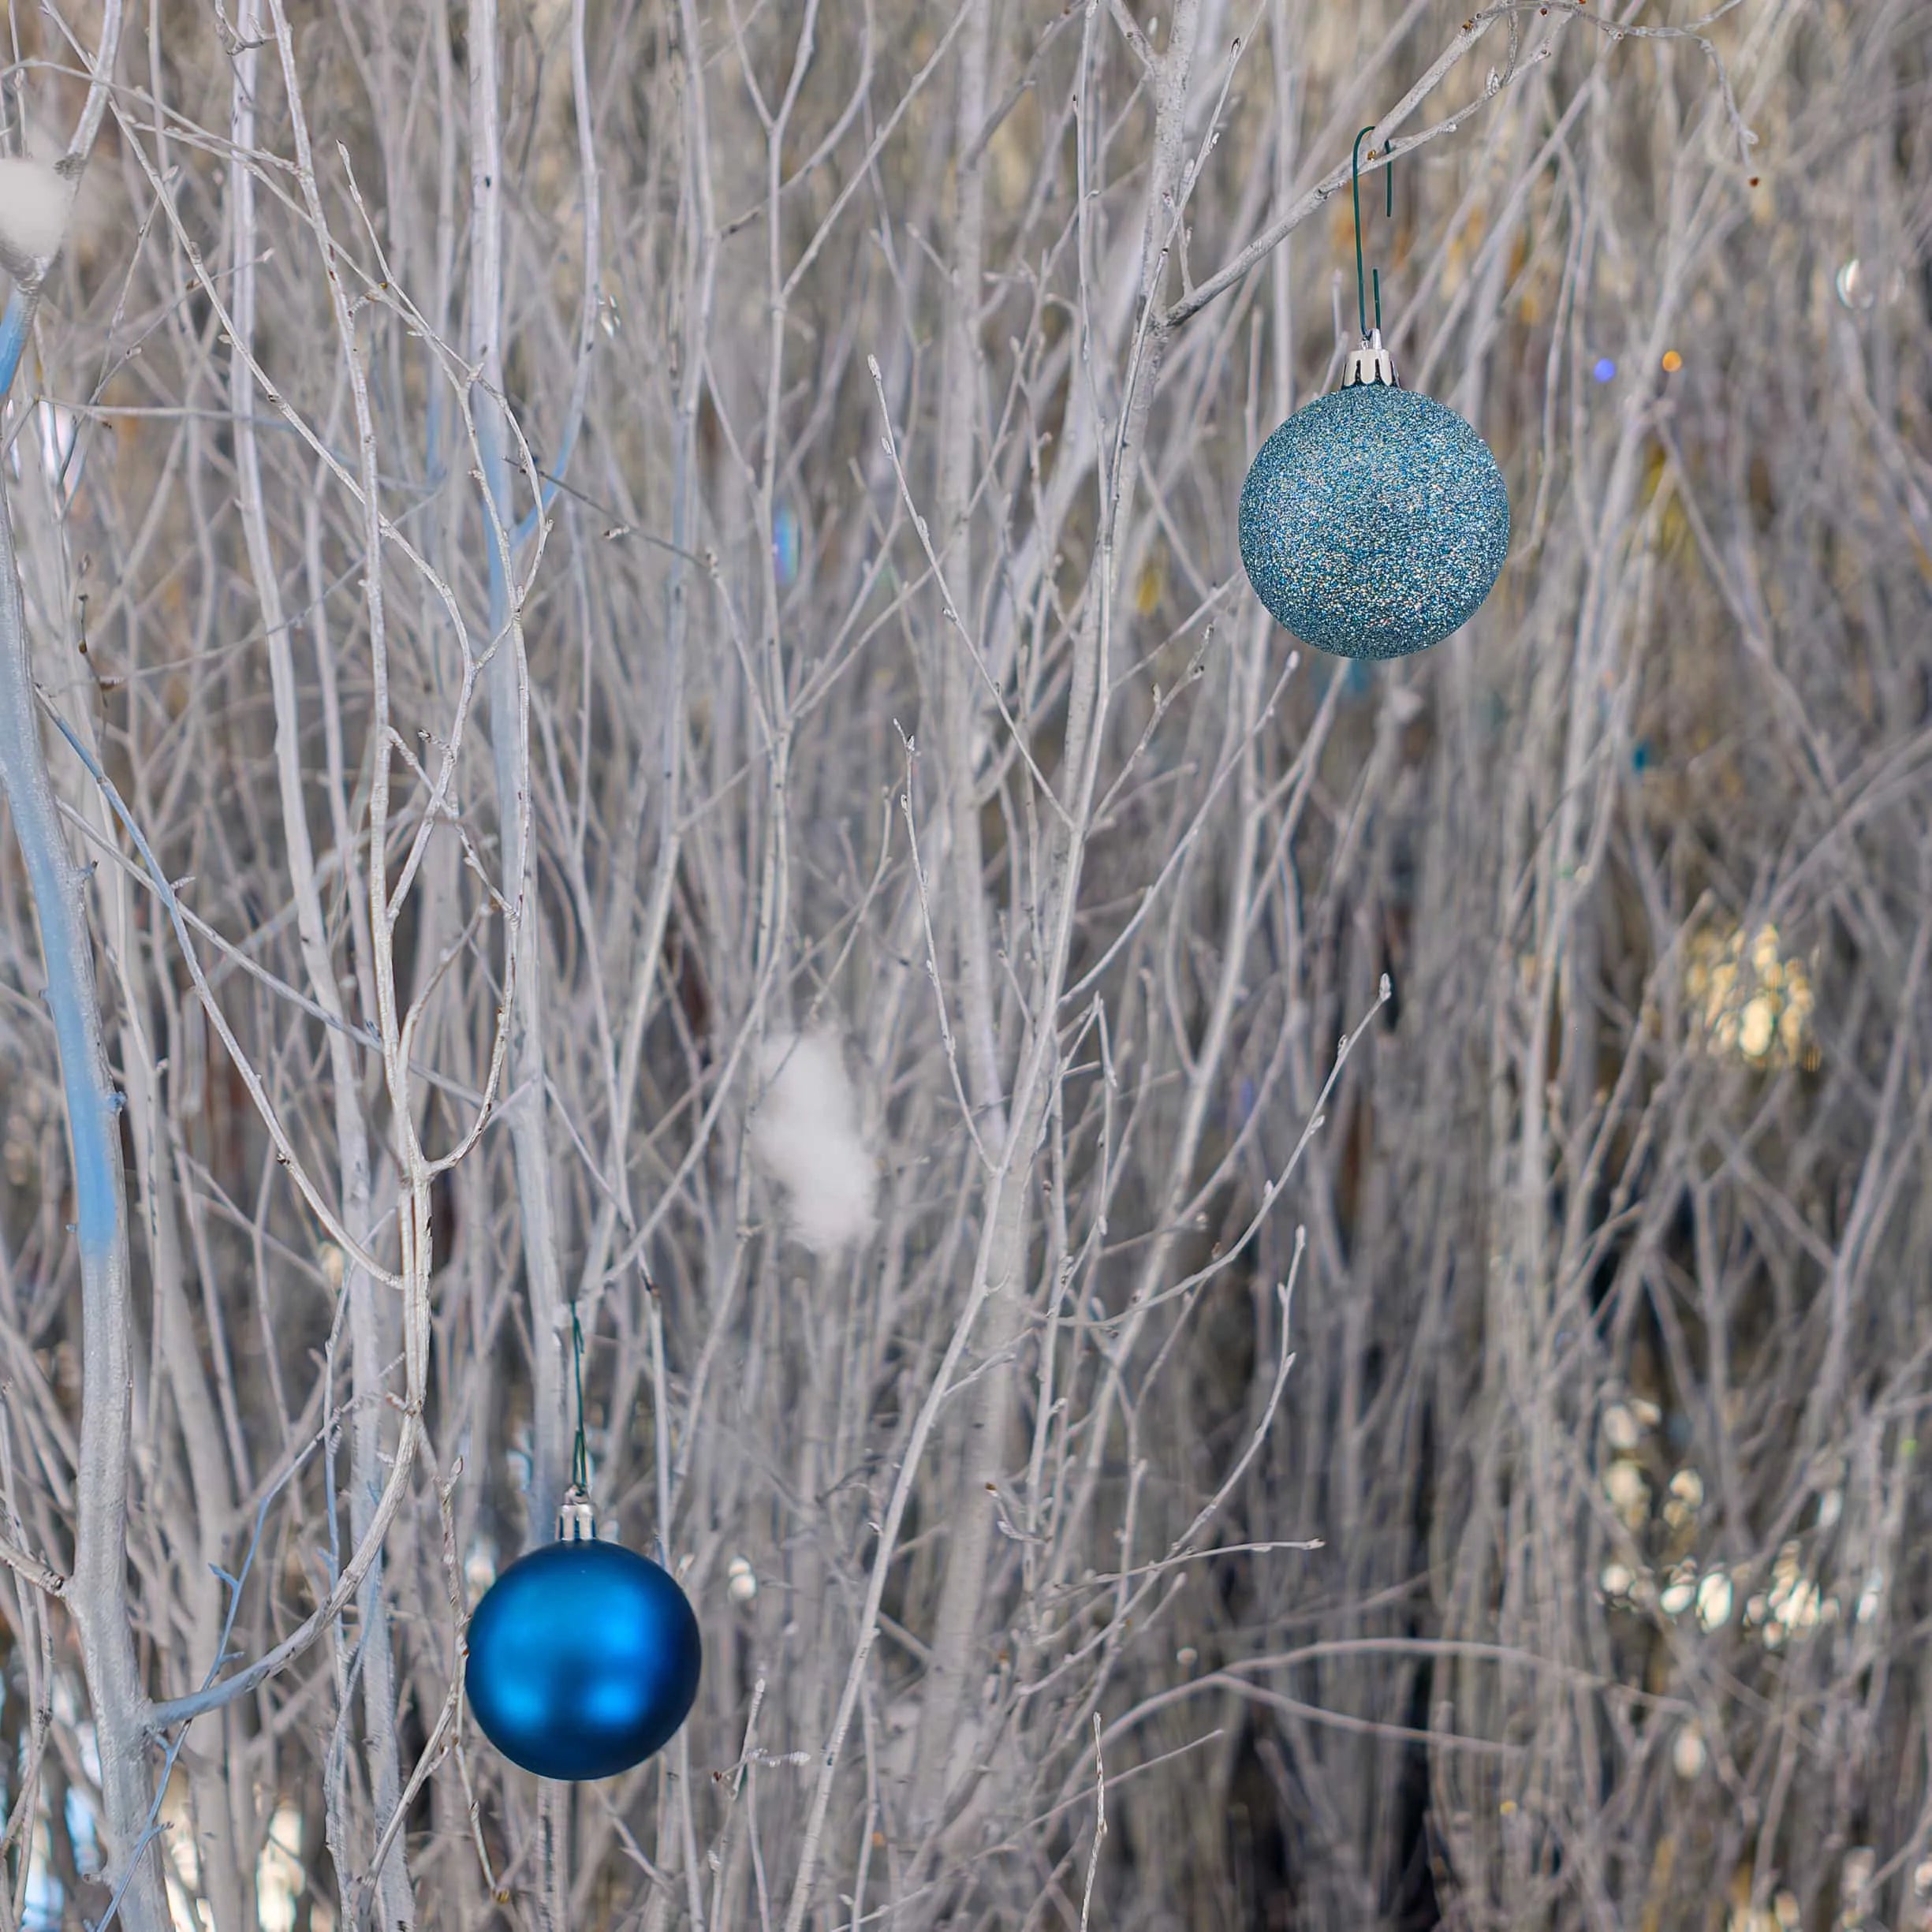 Image of a close-up of a bespoke floral arrangement featuring natural birch branches painted in a frosty silver, set against a soft-focus background, with two Christmas baubles, one in deep sapphire blue and the other glittering with a dusting of snow-like sparkles, that hang amidst the branches. This Christmas Floral installation embodies Christmas's serene and crisp essence as envisioned for the Strand Palace Hotel's holiday decor, designed, produced and installed by Amaranté London -Event Florist.